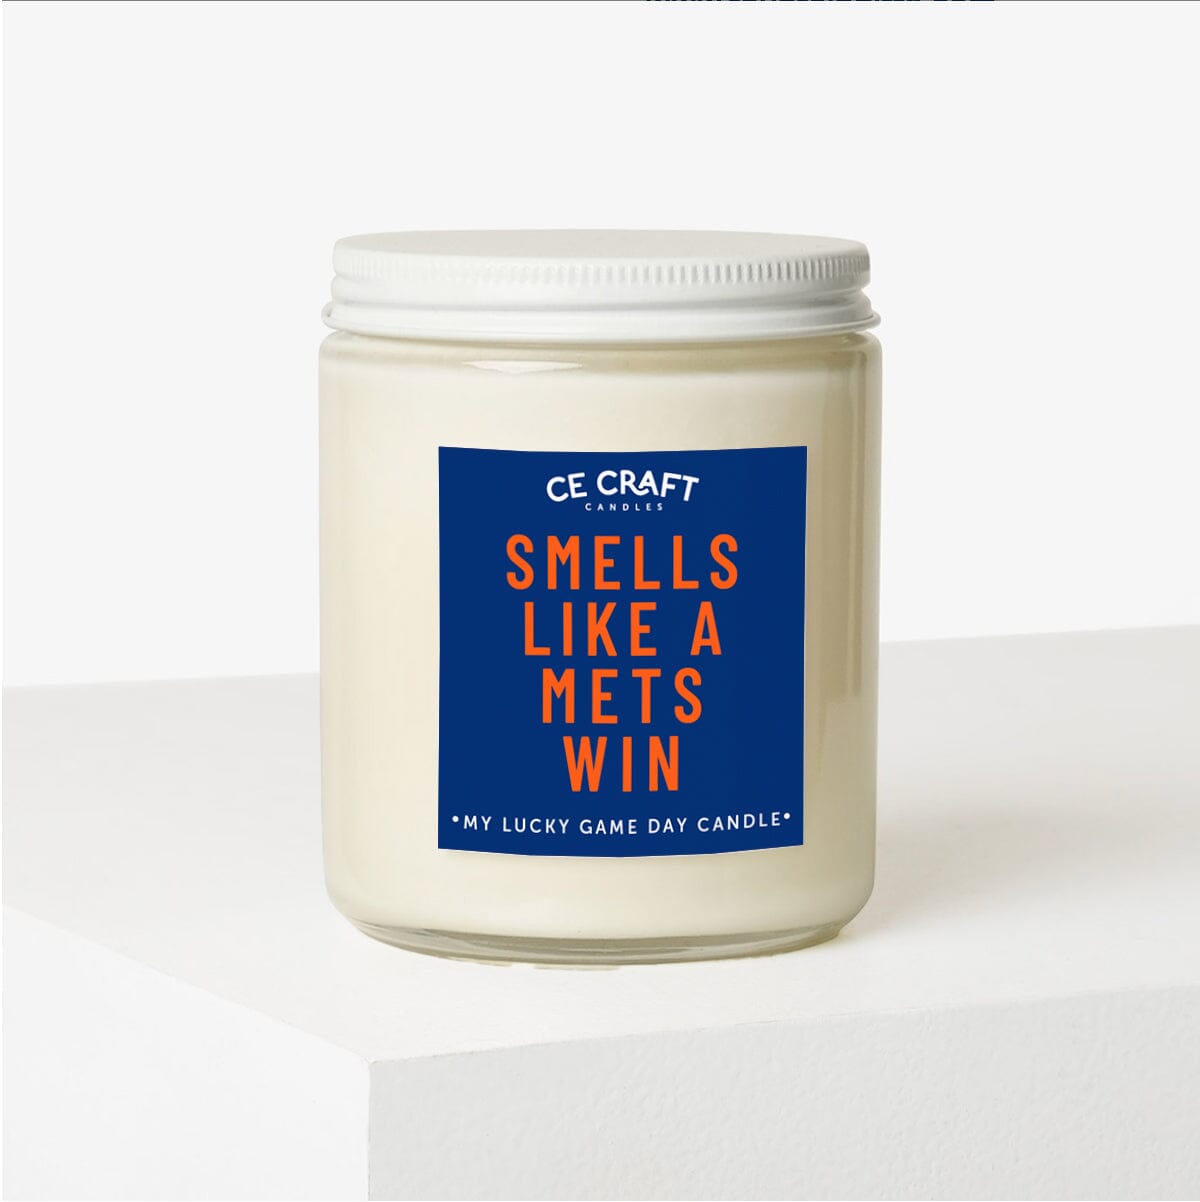 Smells Like a Mets Win Candle Candles CE Craft 